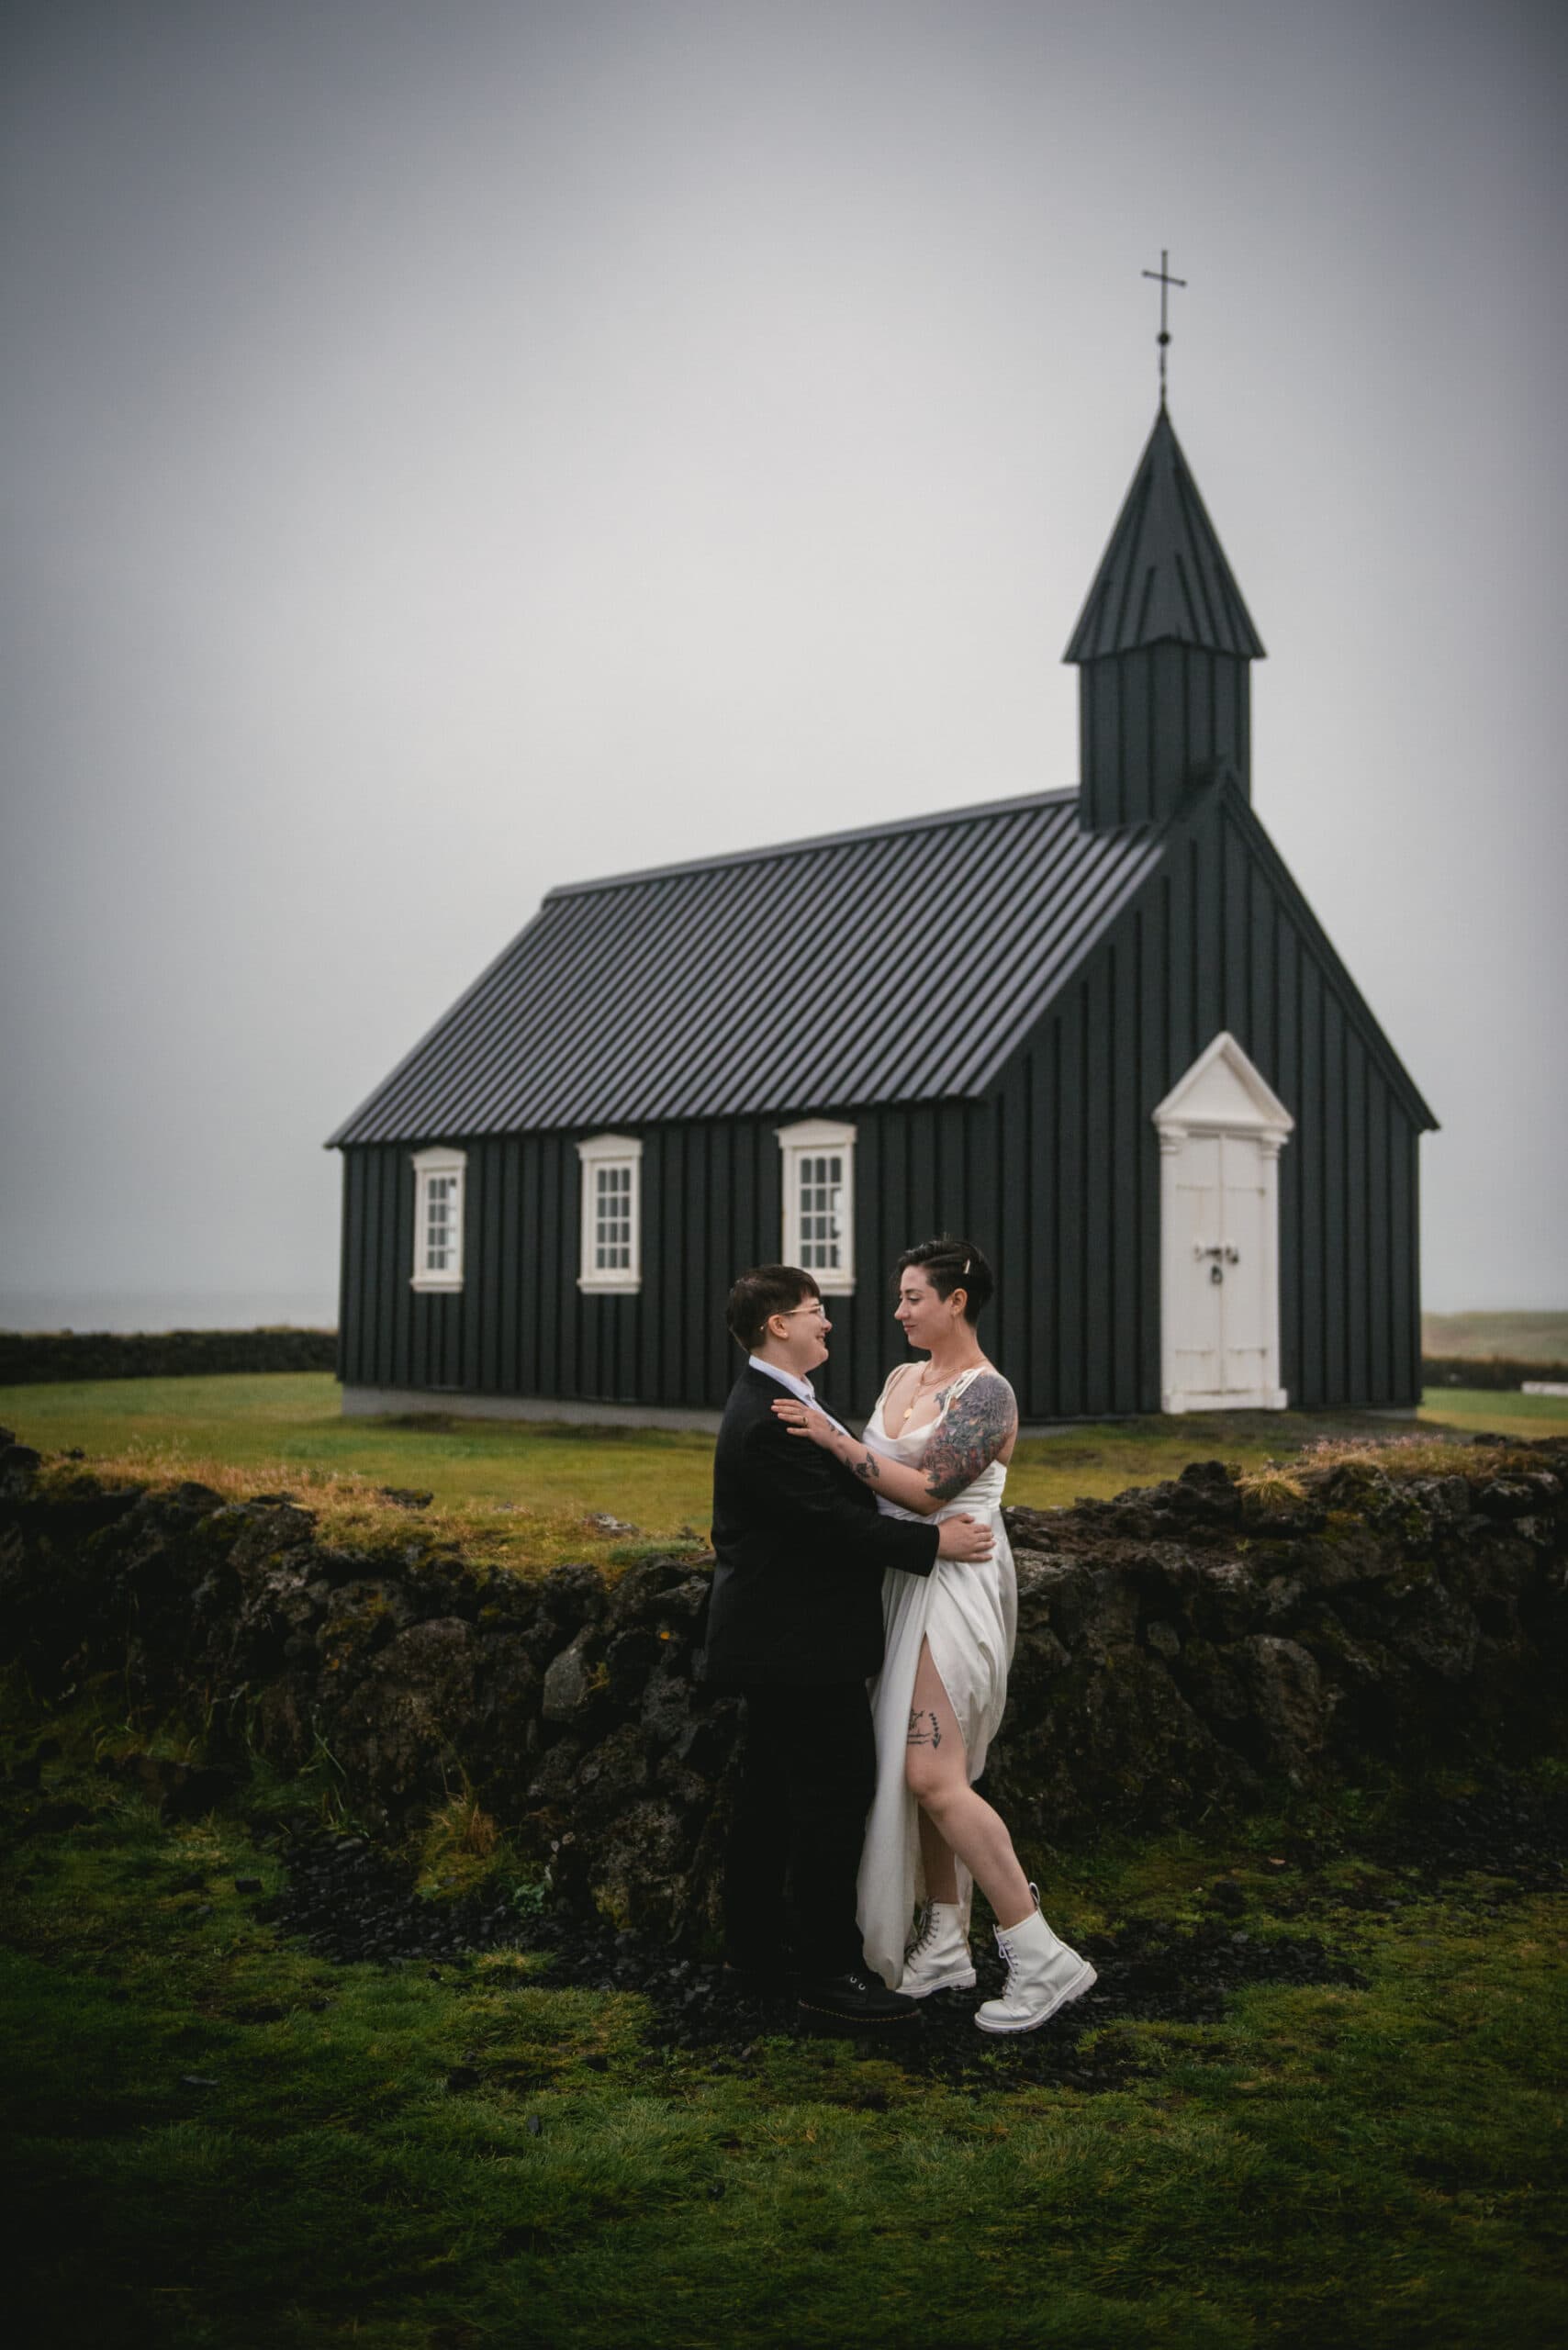 Same-sex couple posing in front of the Budhir church on their elopement day in Iceland